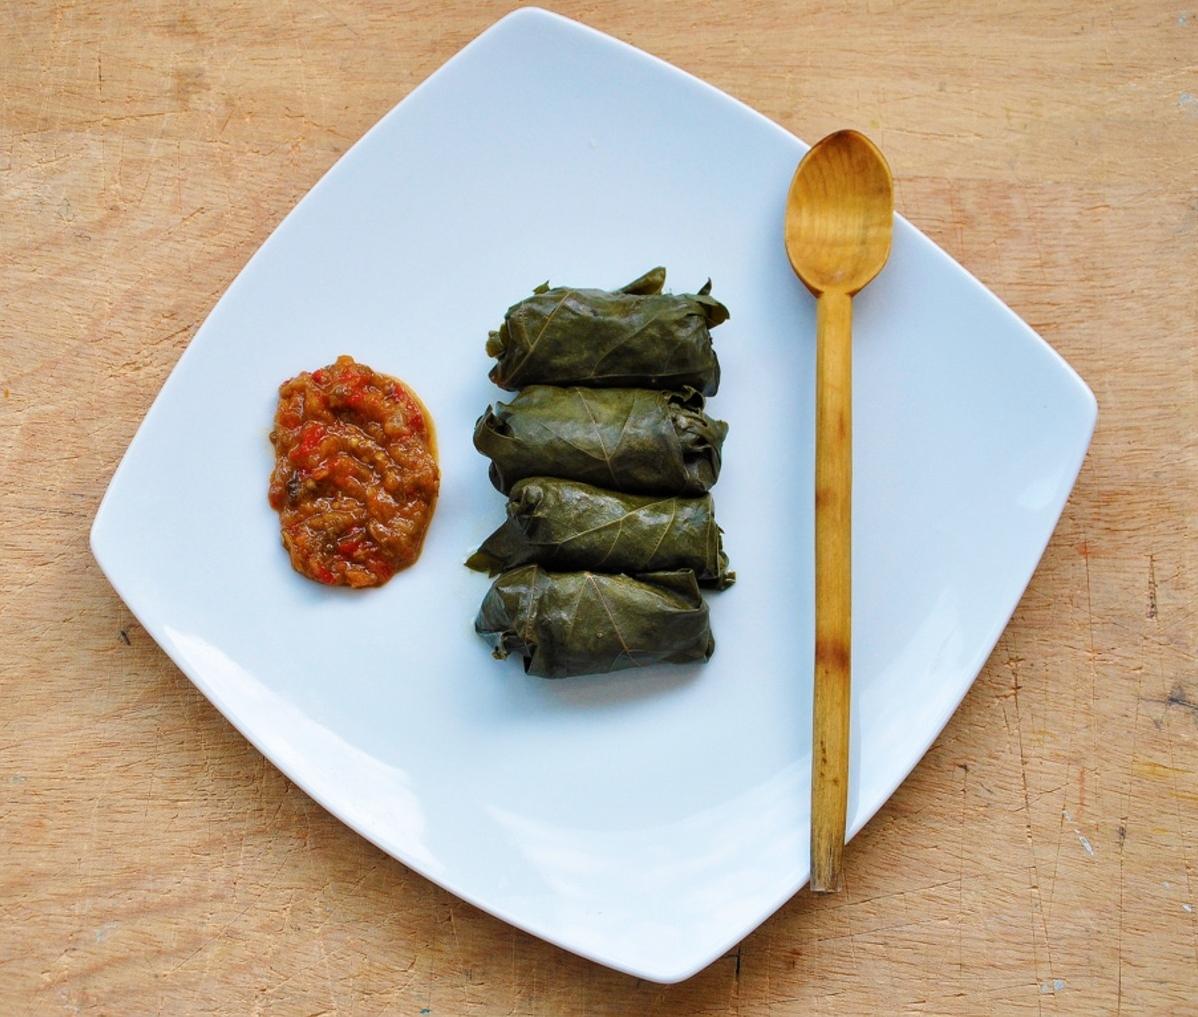  Get ready for these delicious dolmas, stuffed with a mushroom and brown rice filling